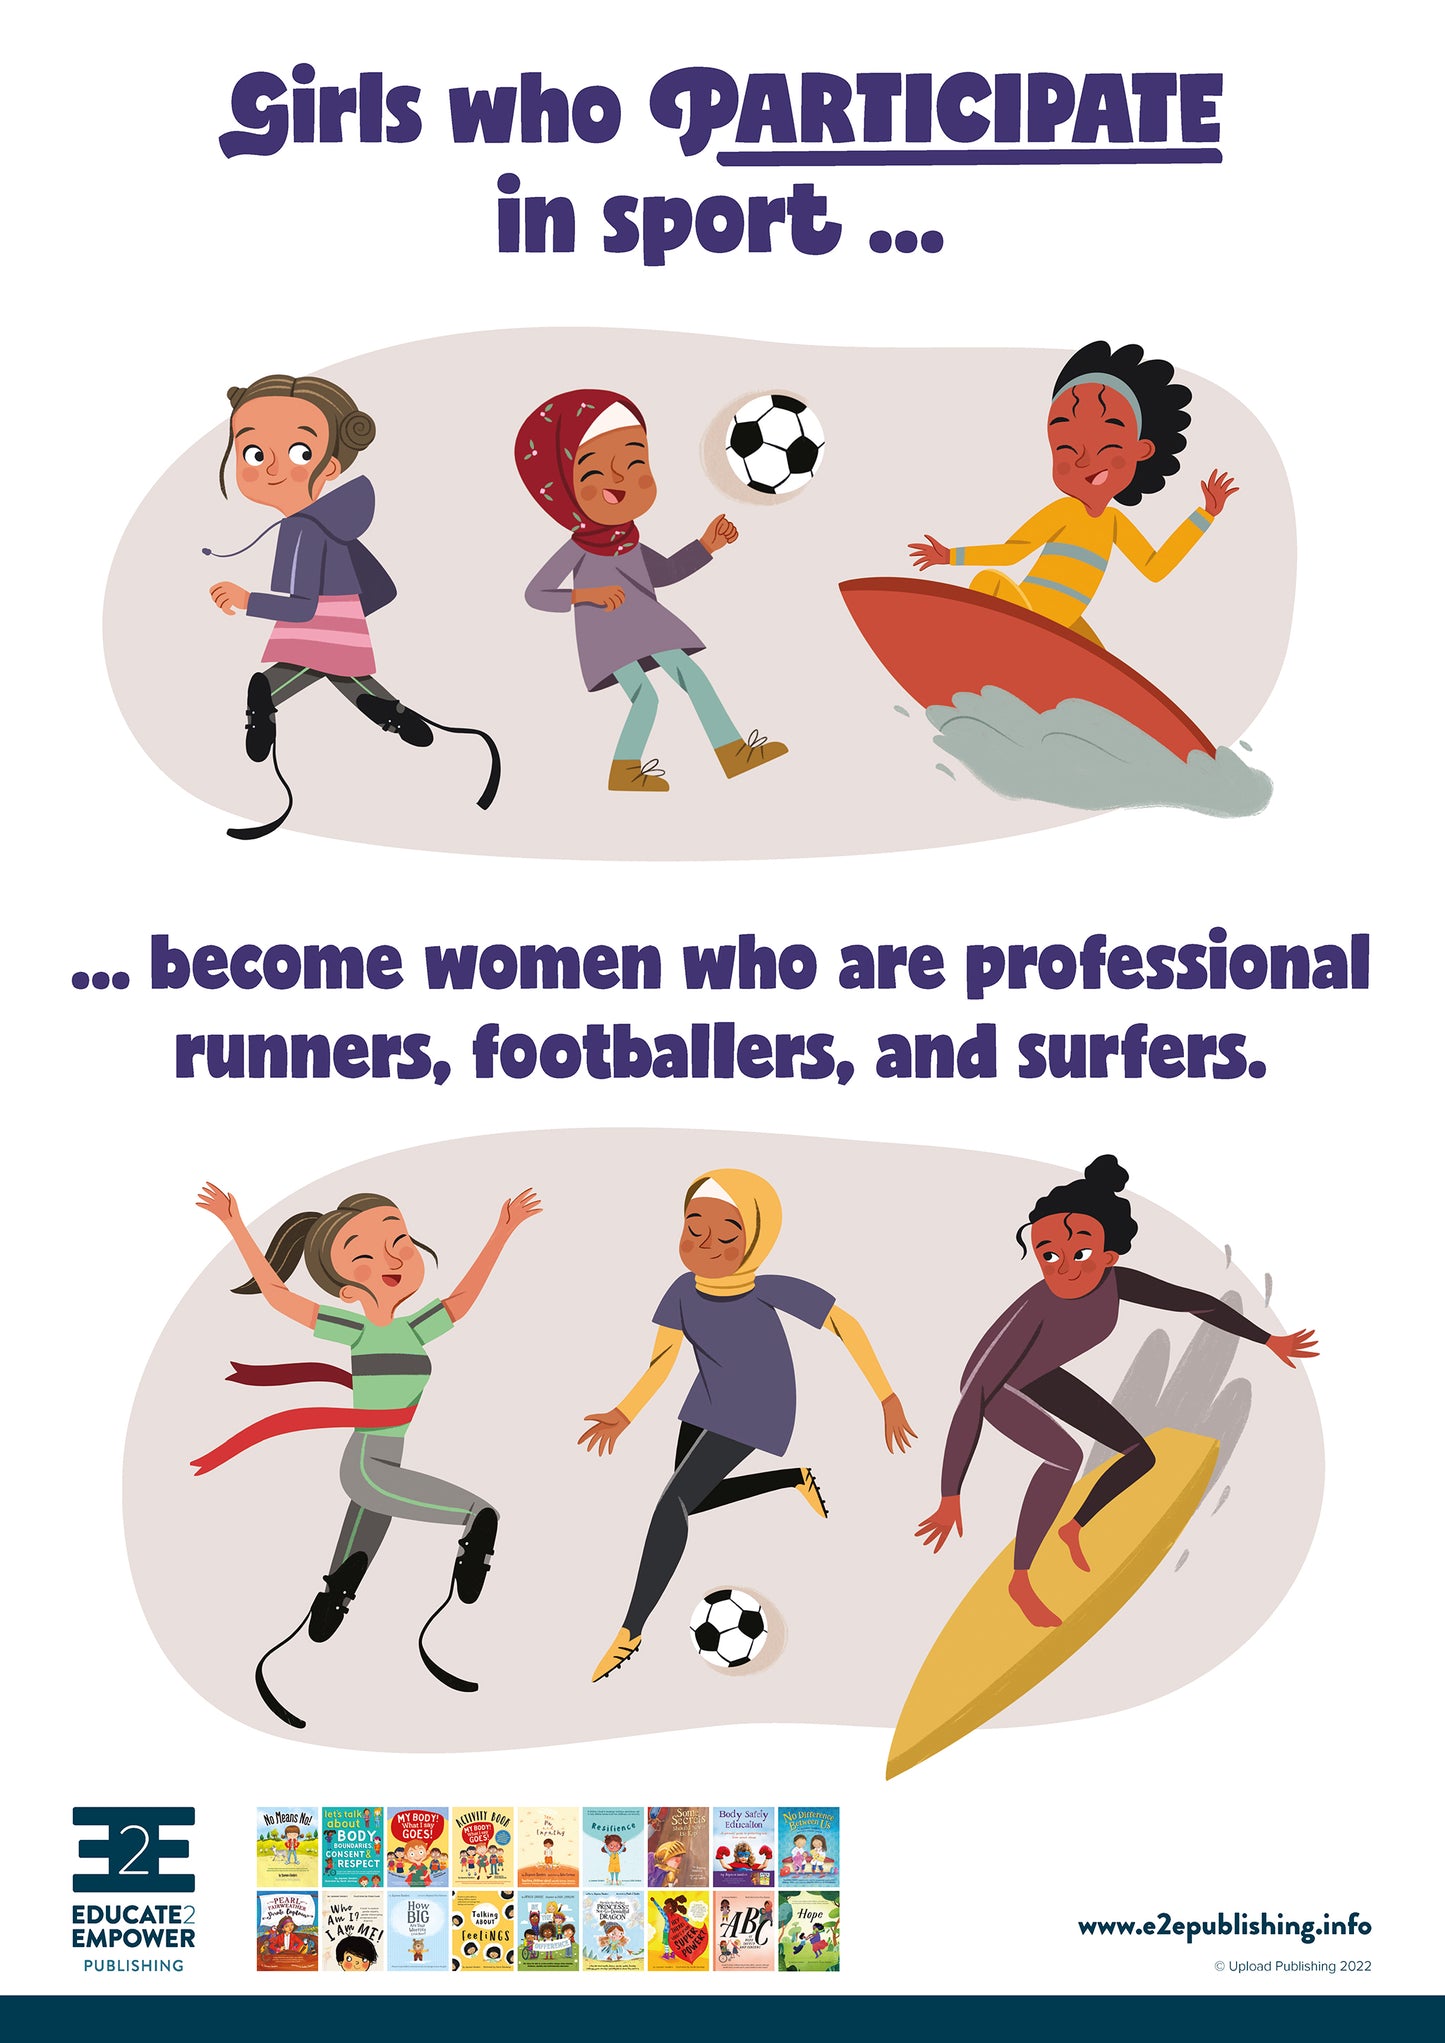 A poster for children titled 'Girls who participate in sport... become women who are professional runners, footballers and surfers.' This is accompanied by cartoon images of three young girls running, playing football and surfing, and below this the same girls as adults working as professional athletes.